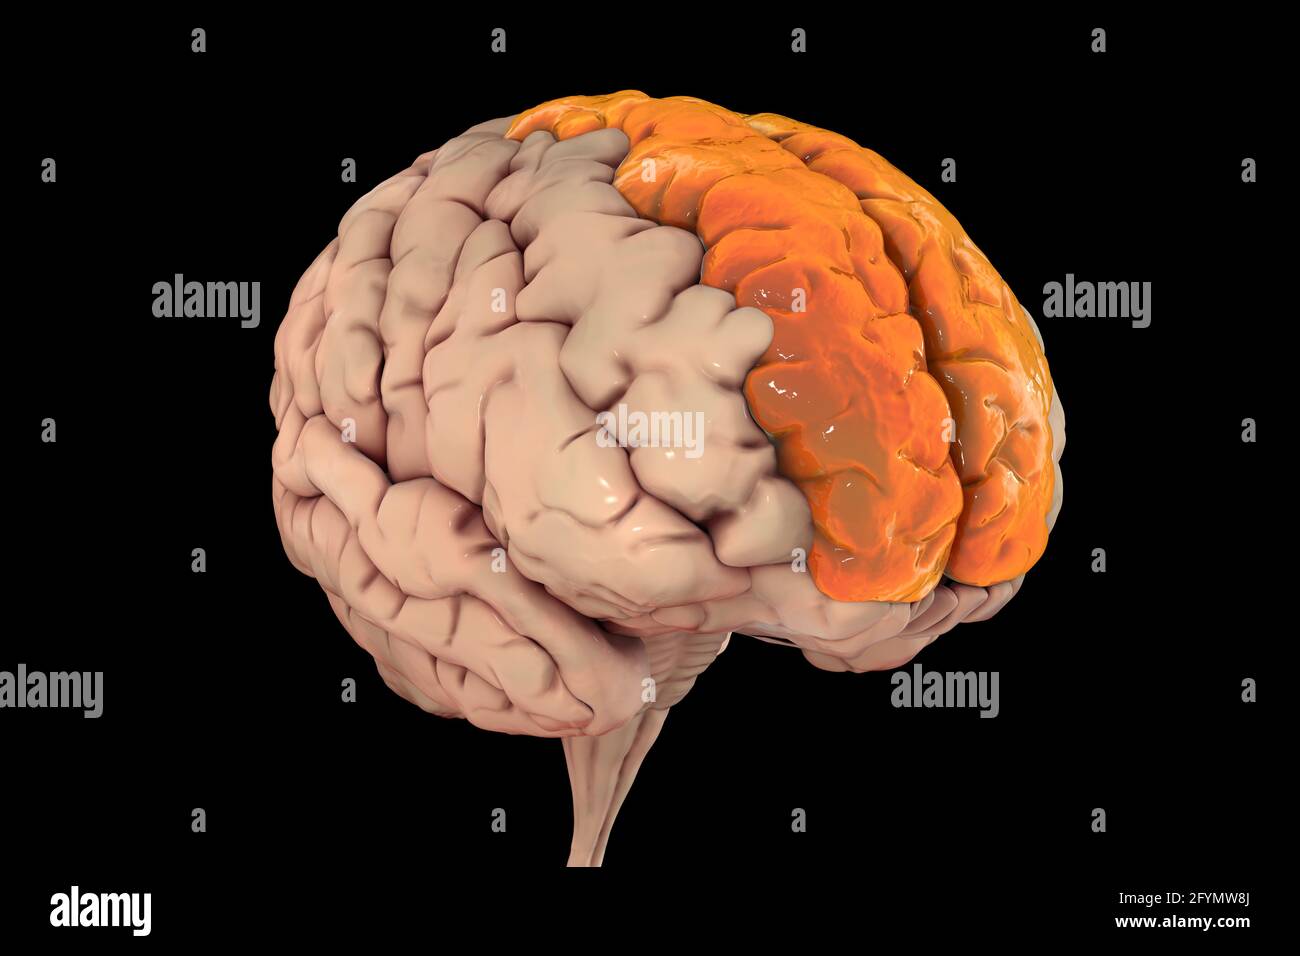 Brain with highlighted superior frontal gyri, illustration Stock Photo